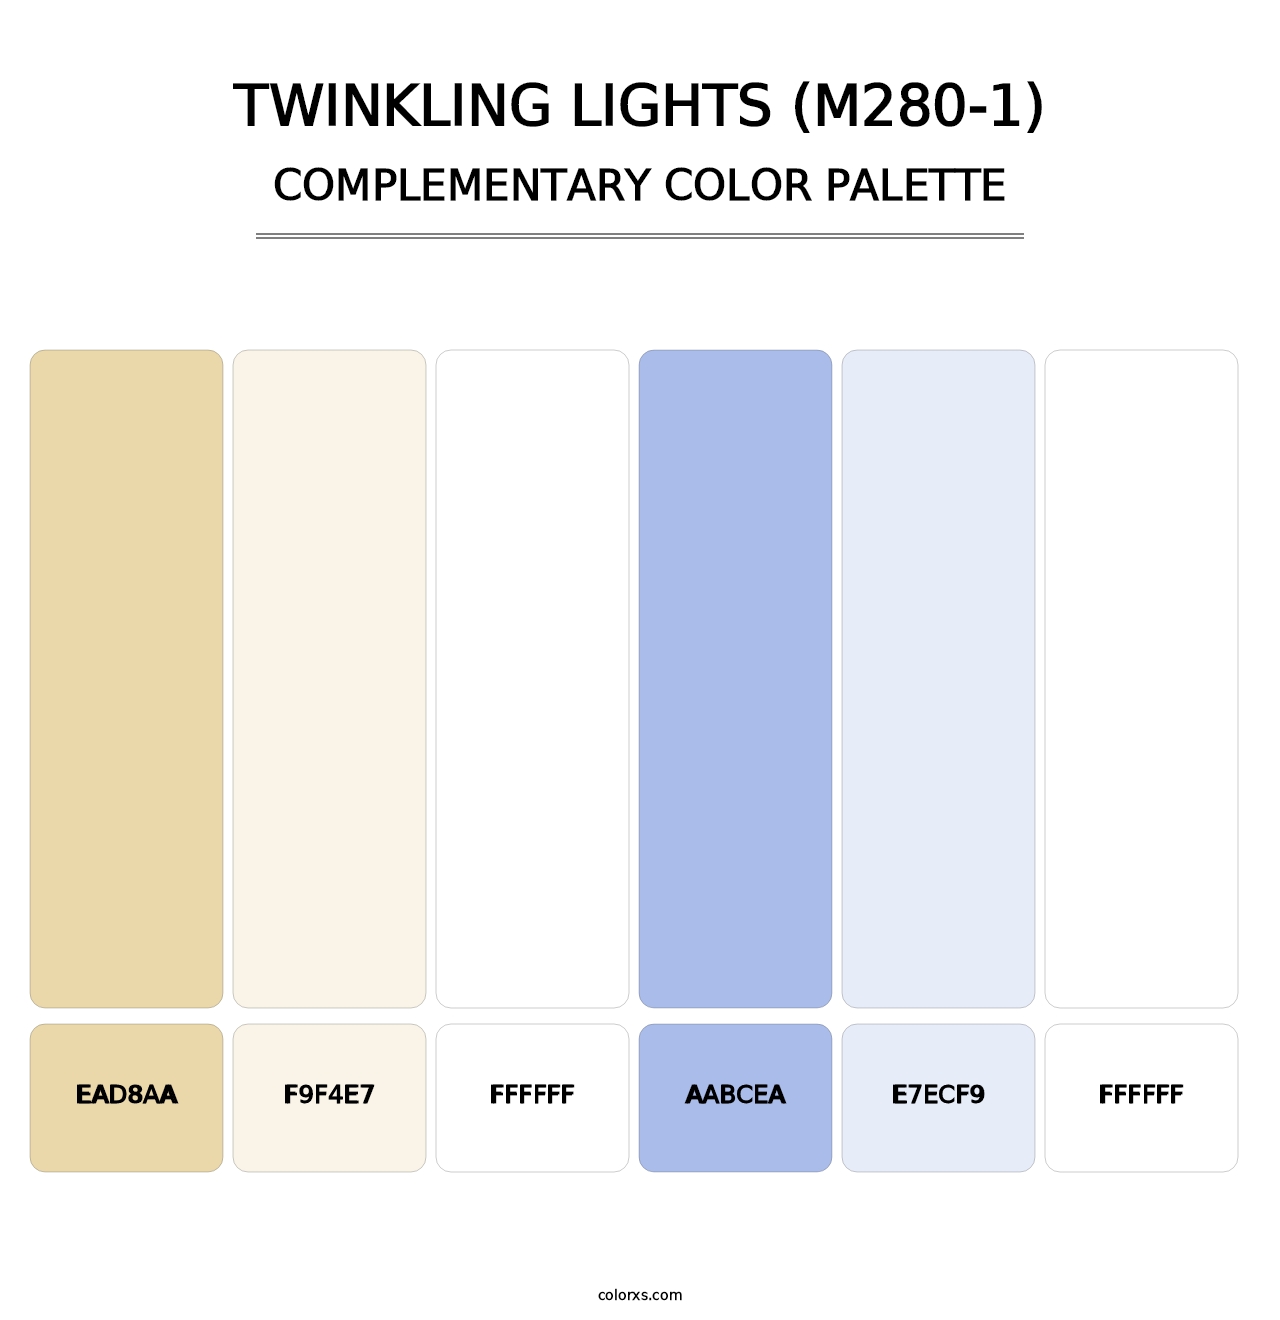 Twinkling Lights (M280-1) - Complementary Color Palette